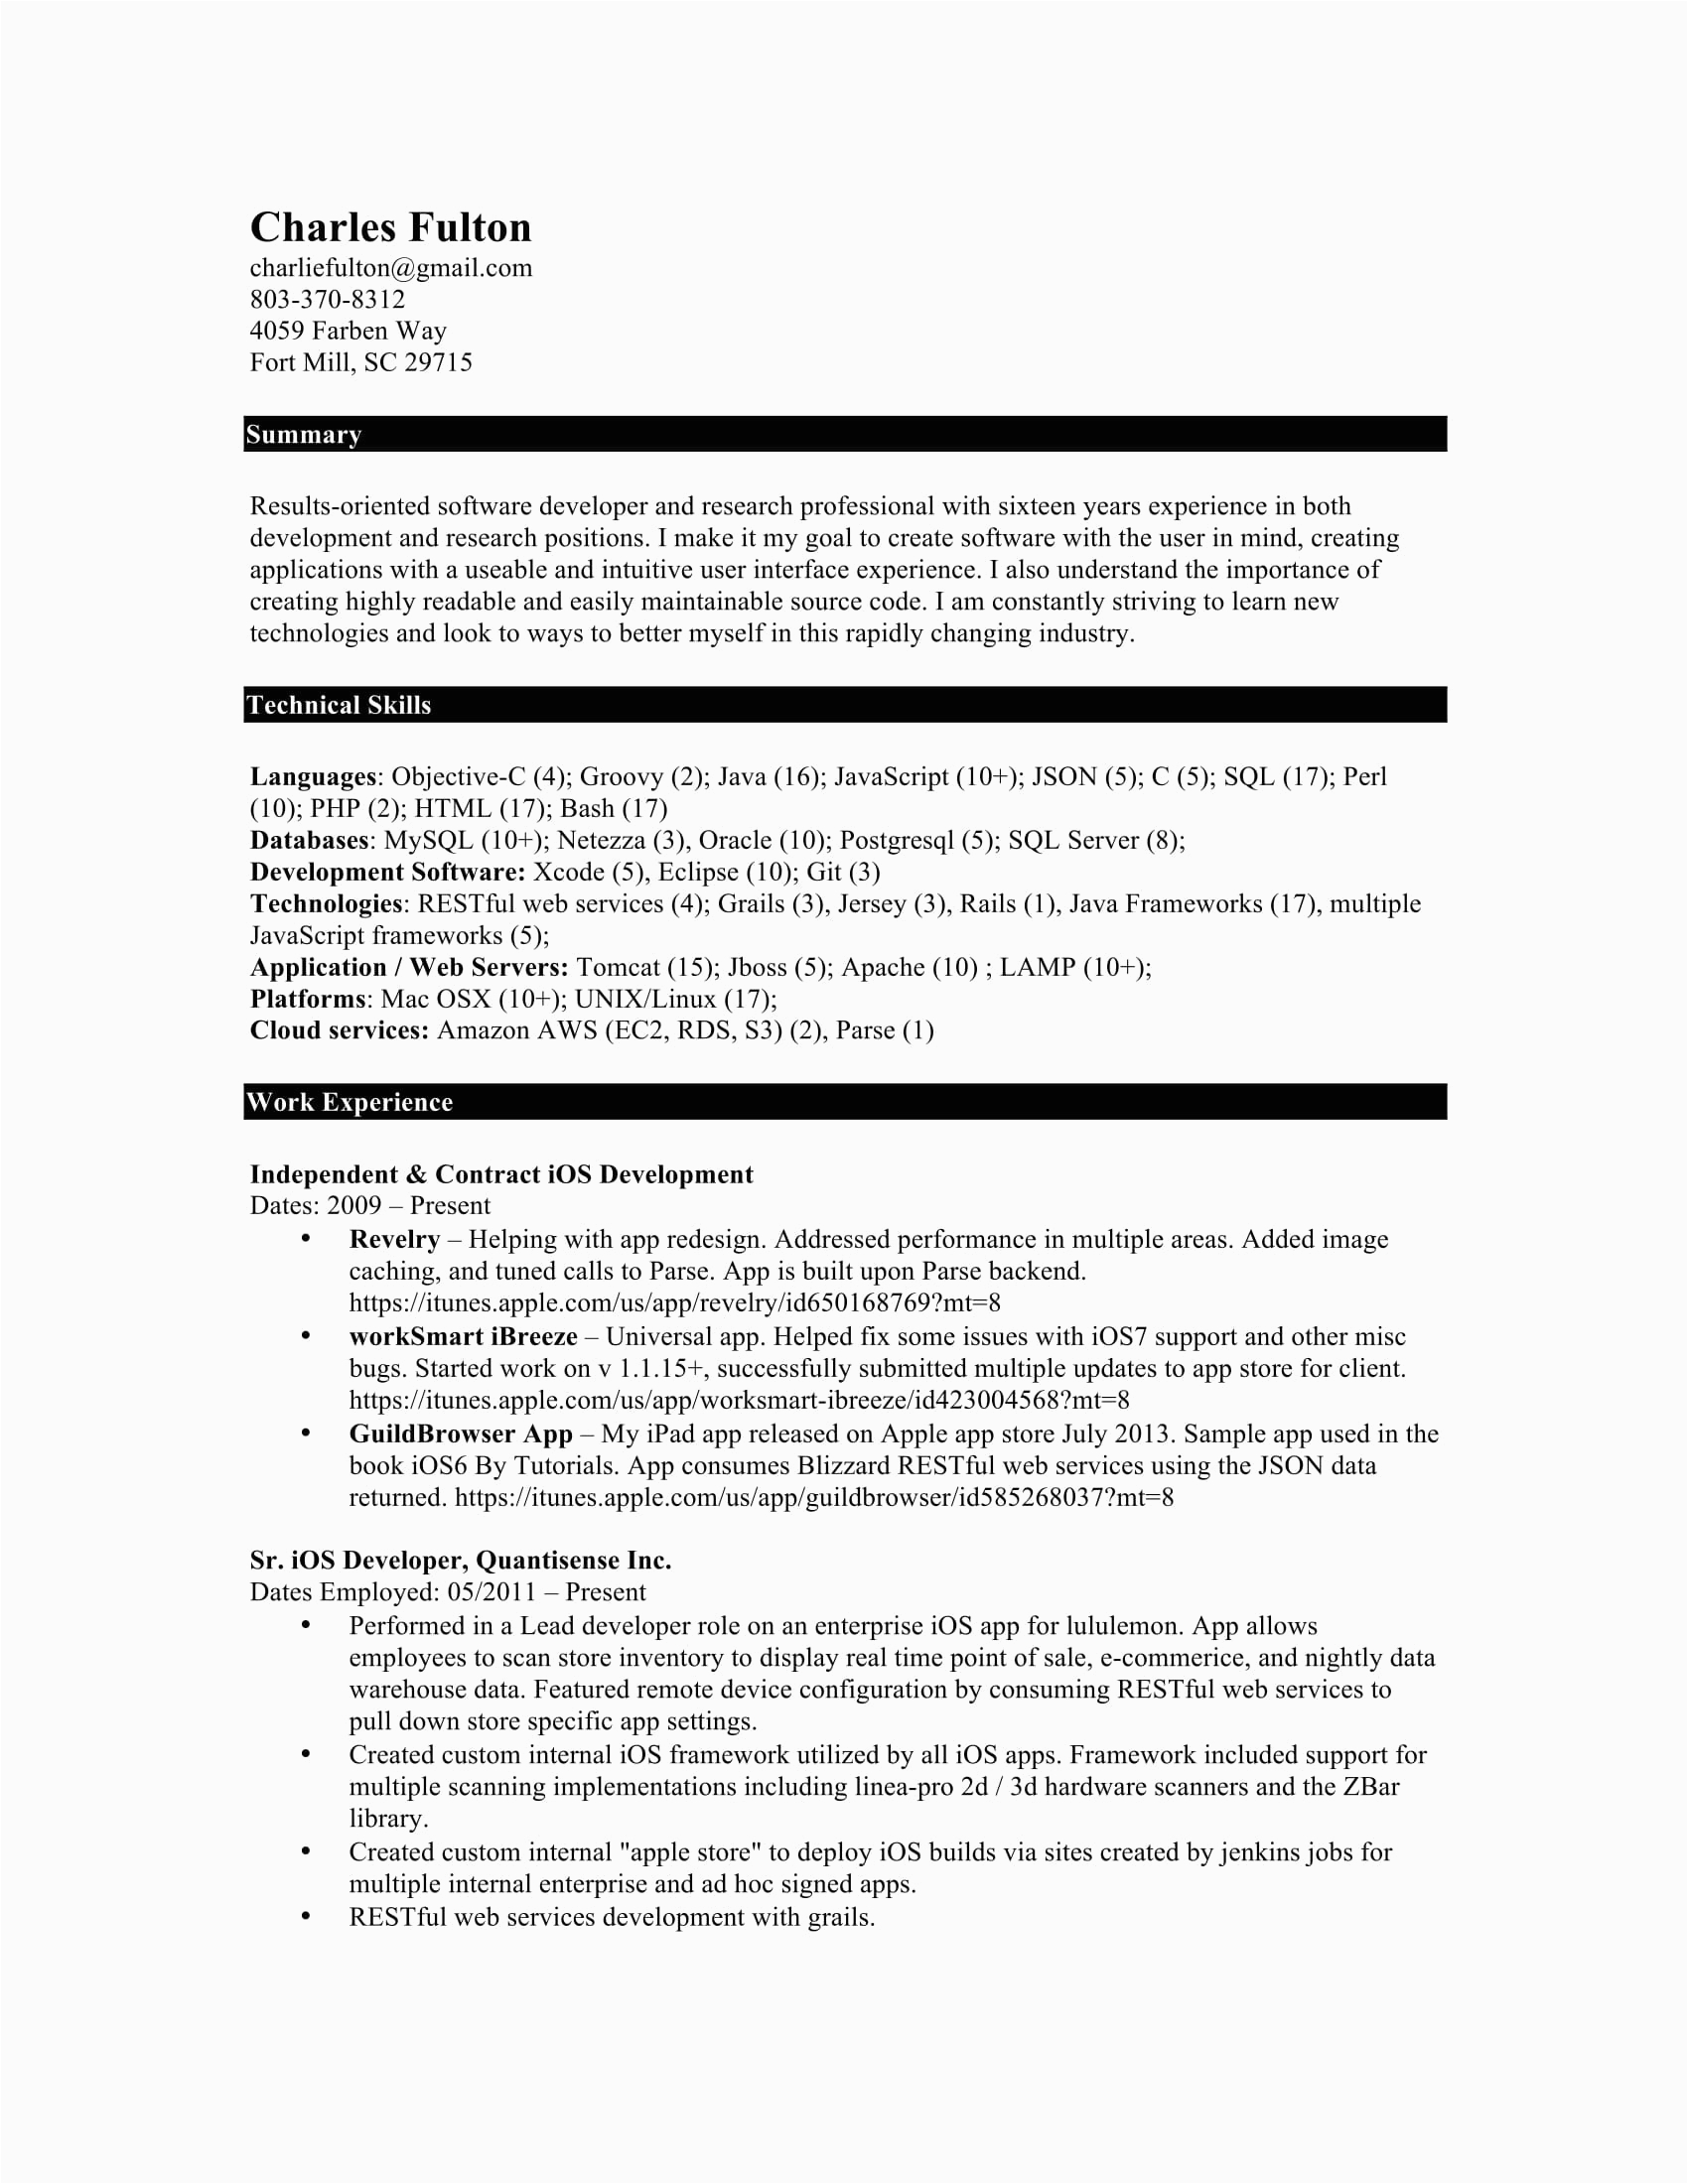 Sample Resume for software Engineer with 2 Years Experience Pdf 2 Year Experience Resume format for software Developer Doc